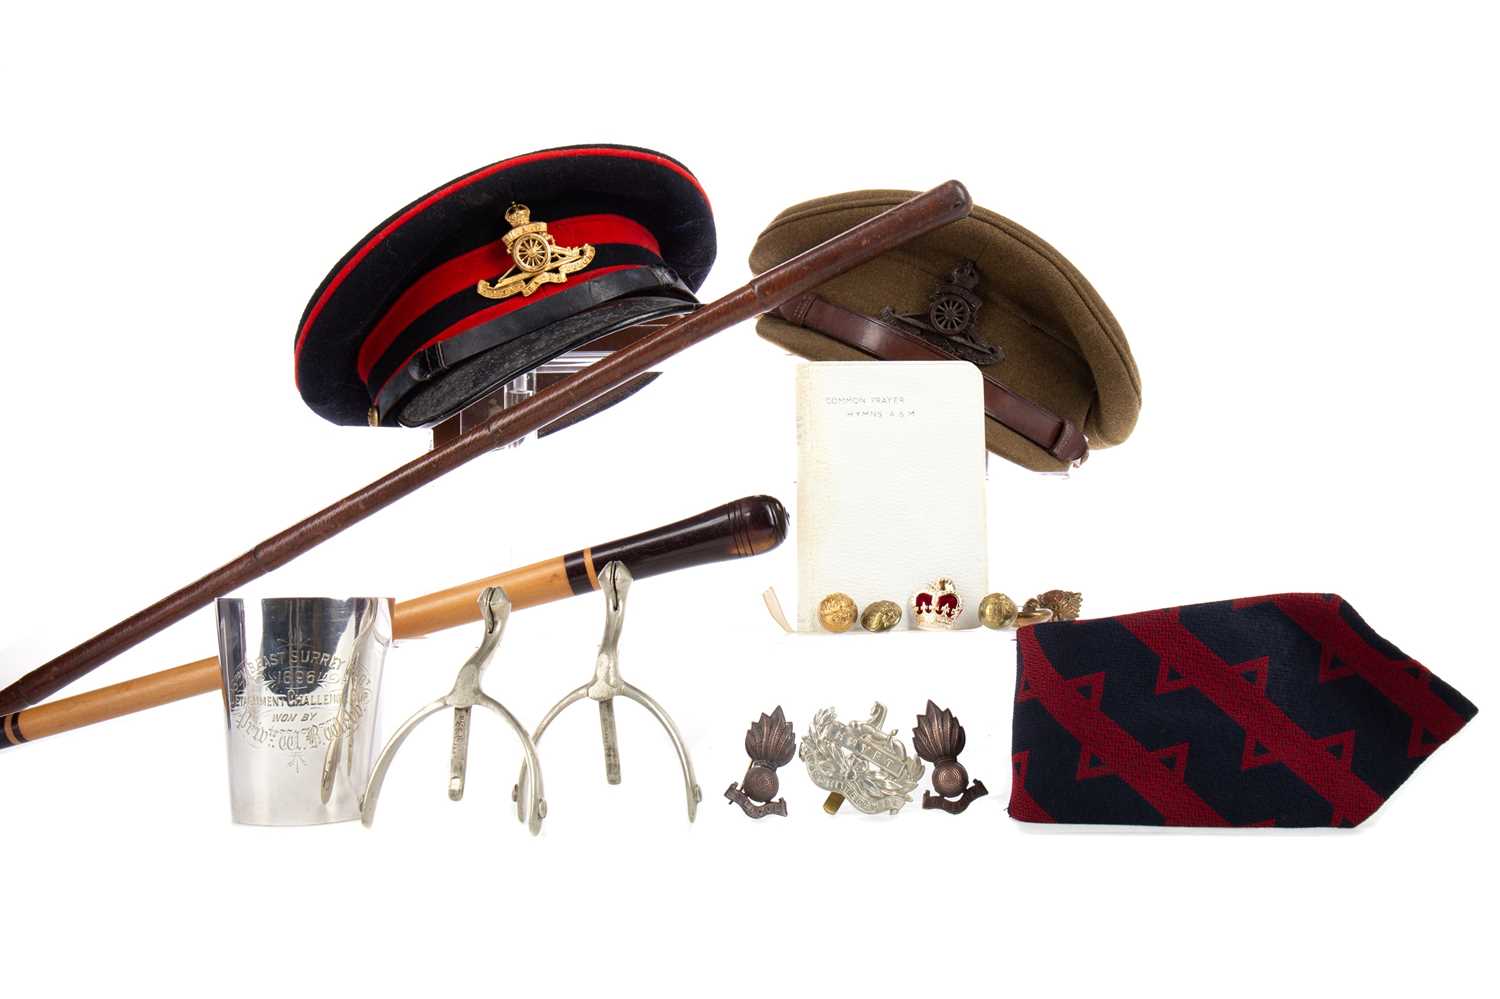 TWO OFFICER'S CAPS, TWO SWAGGER STICKS, CAP BADGES AND BUTTONS